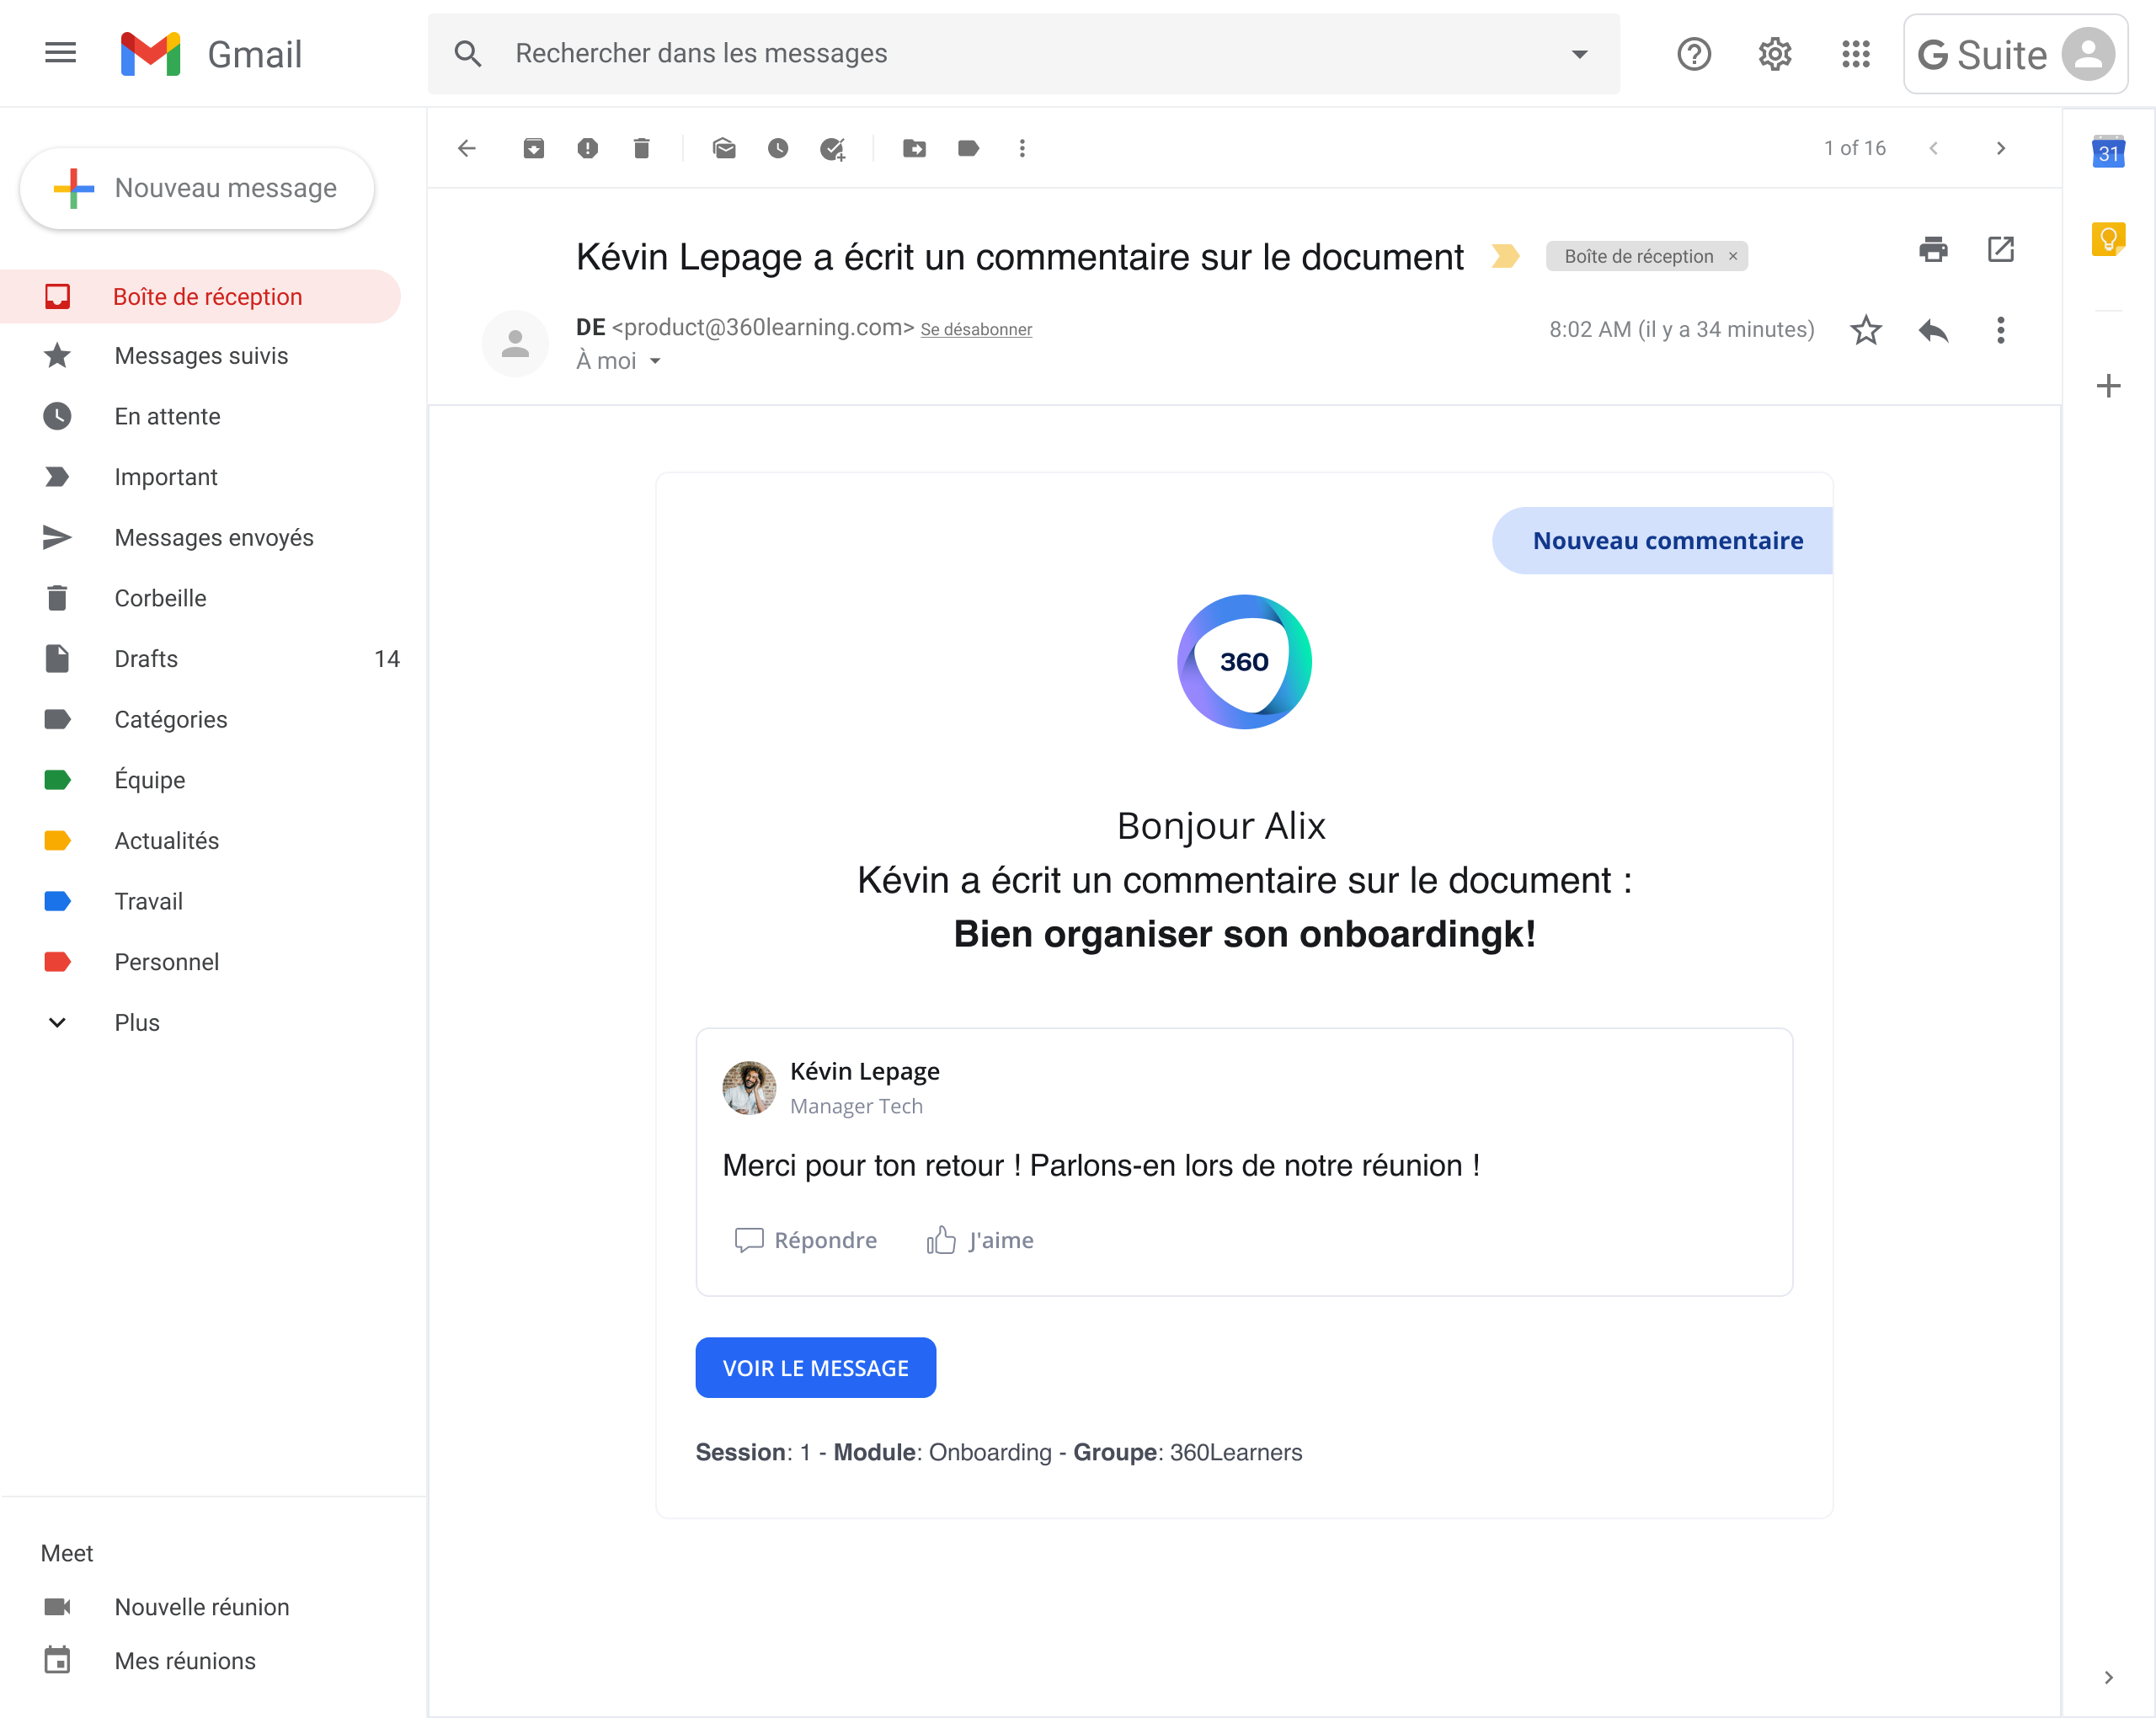 Redesign des notifications | 360Learning